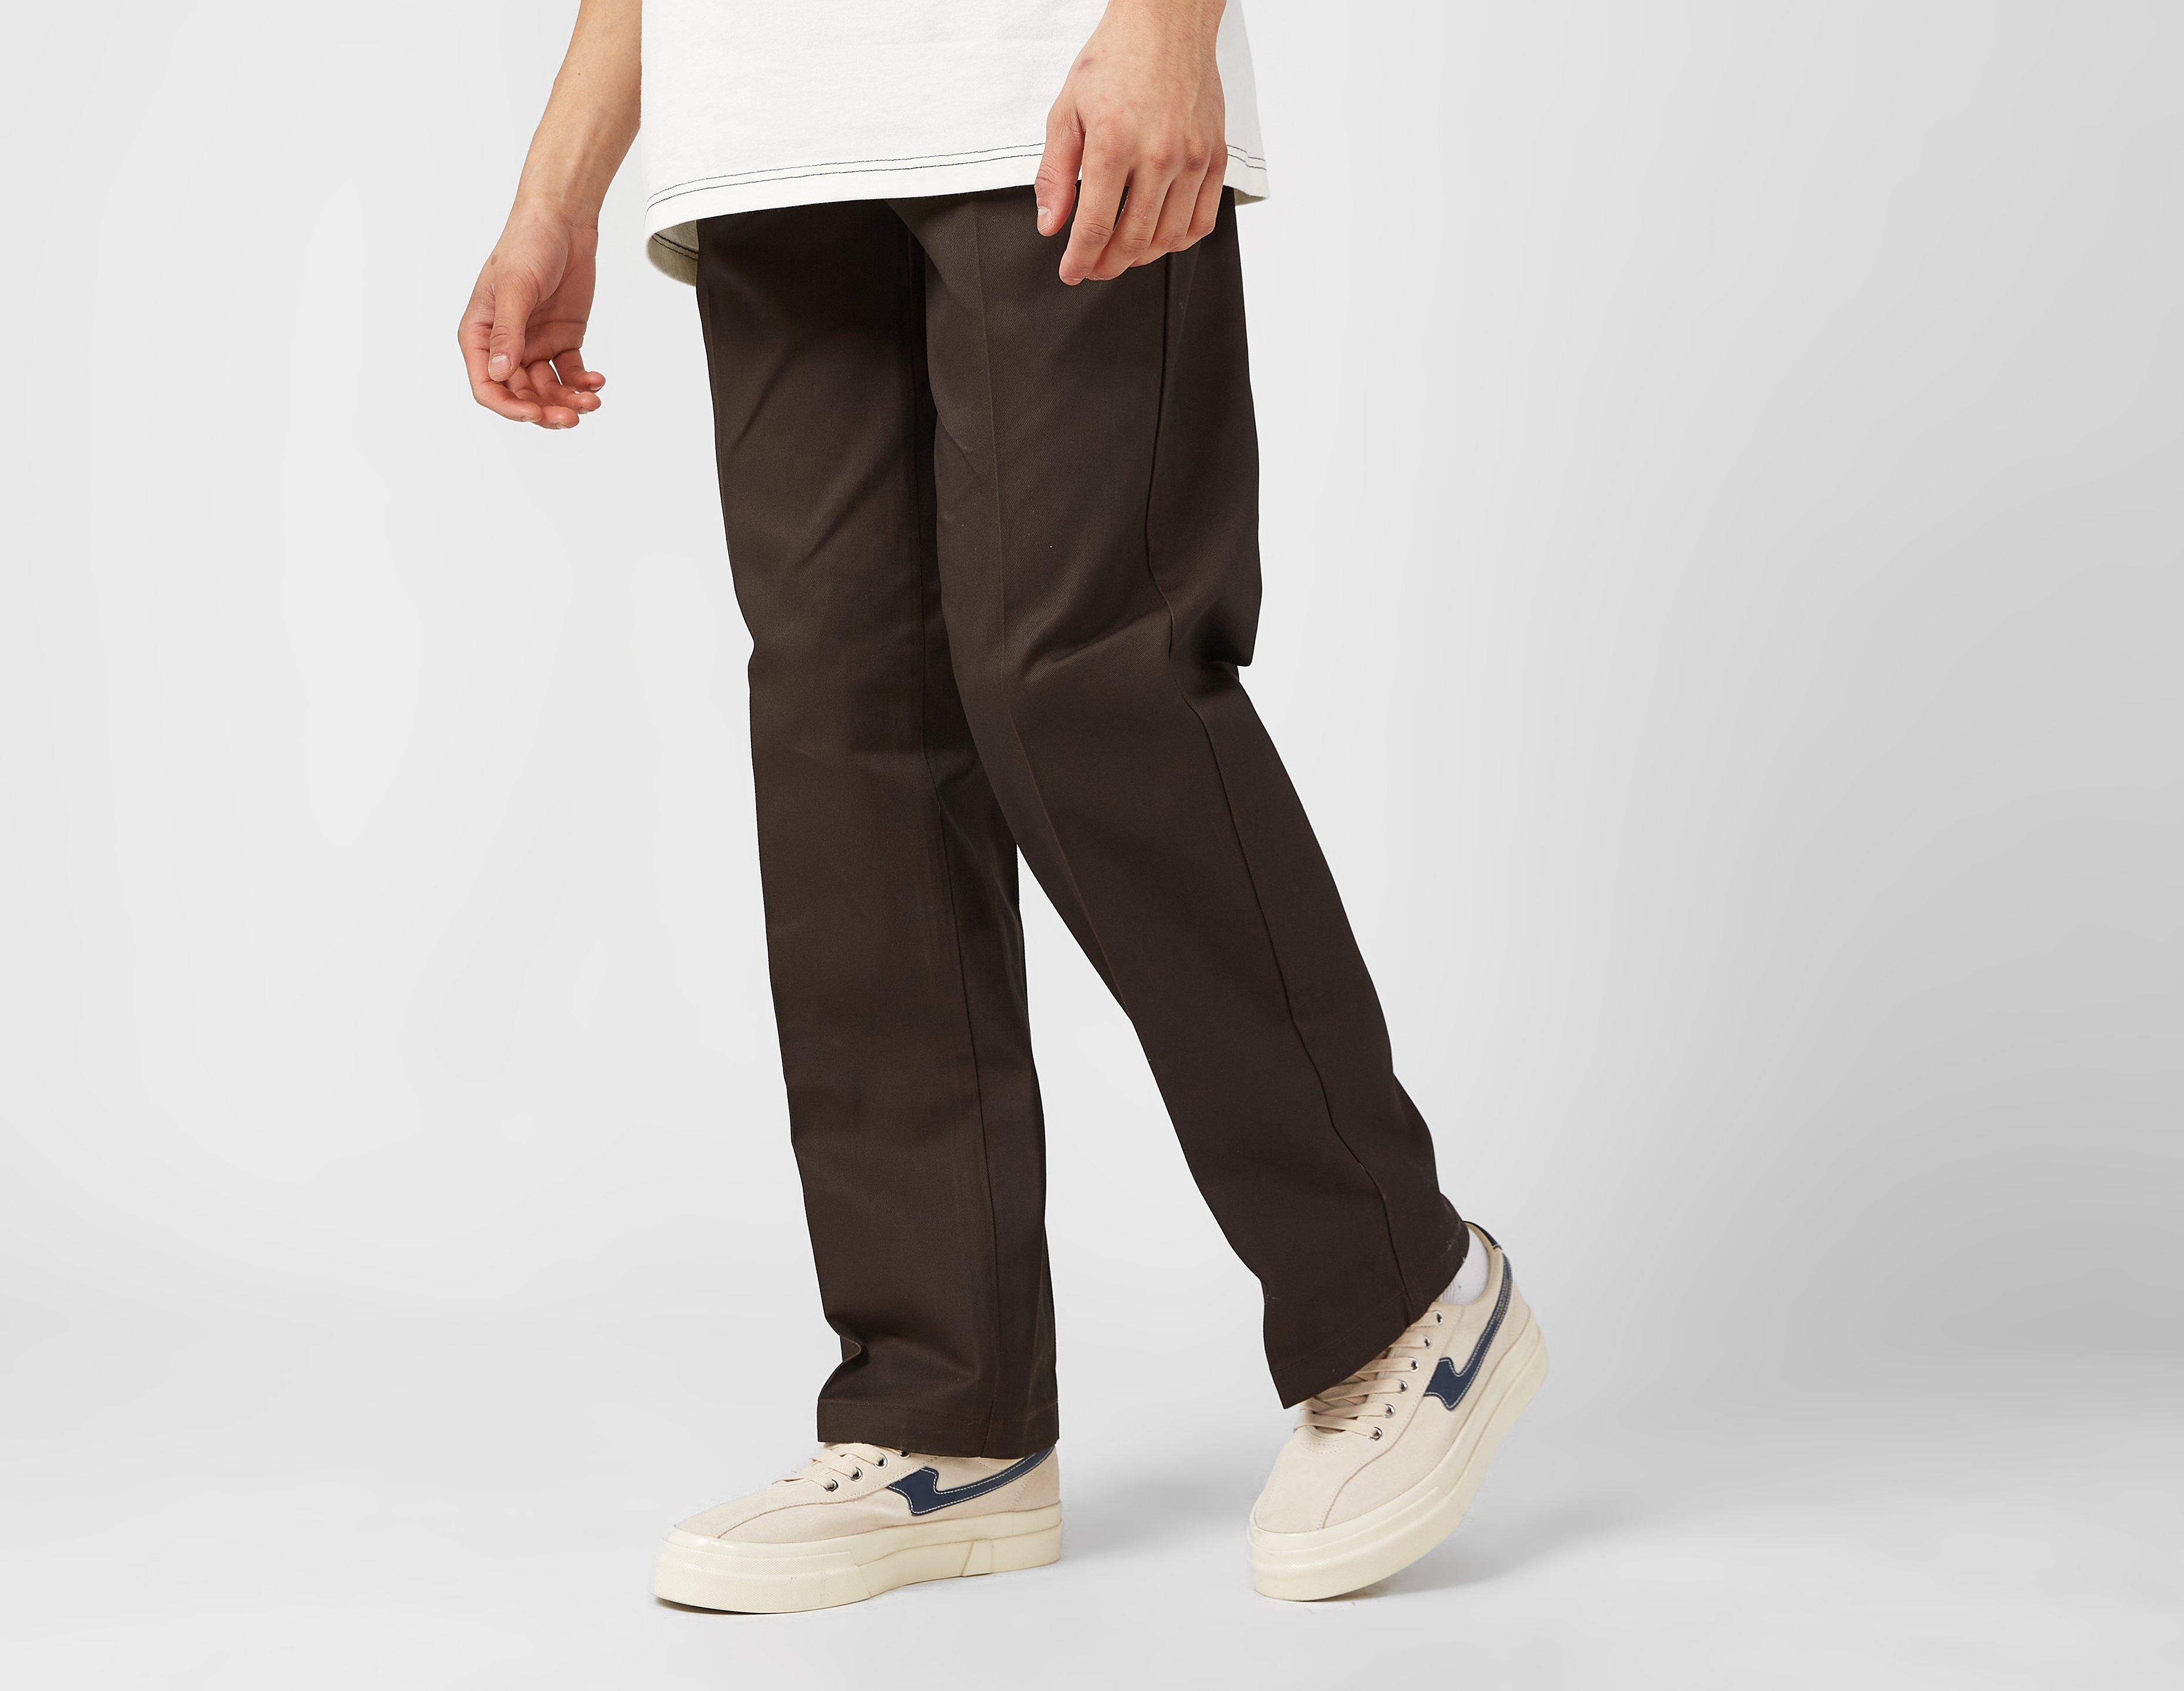 Dickies Joggers & Track Pants for Women sale - discounted price